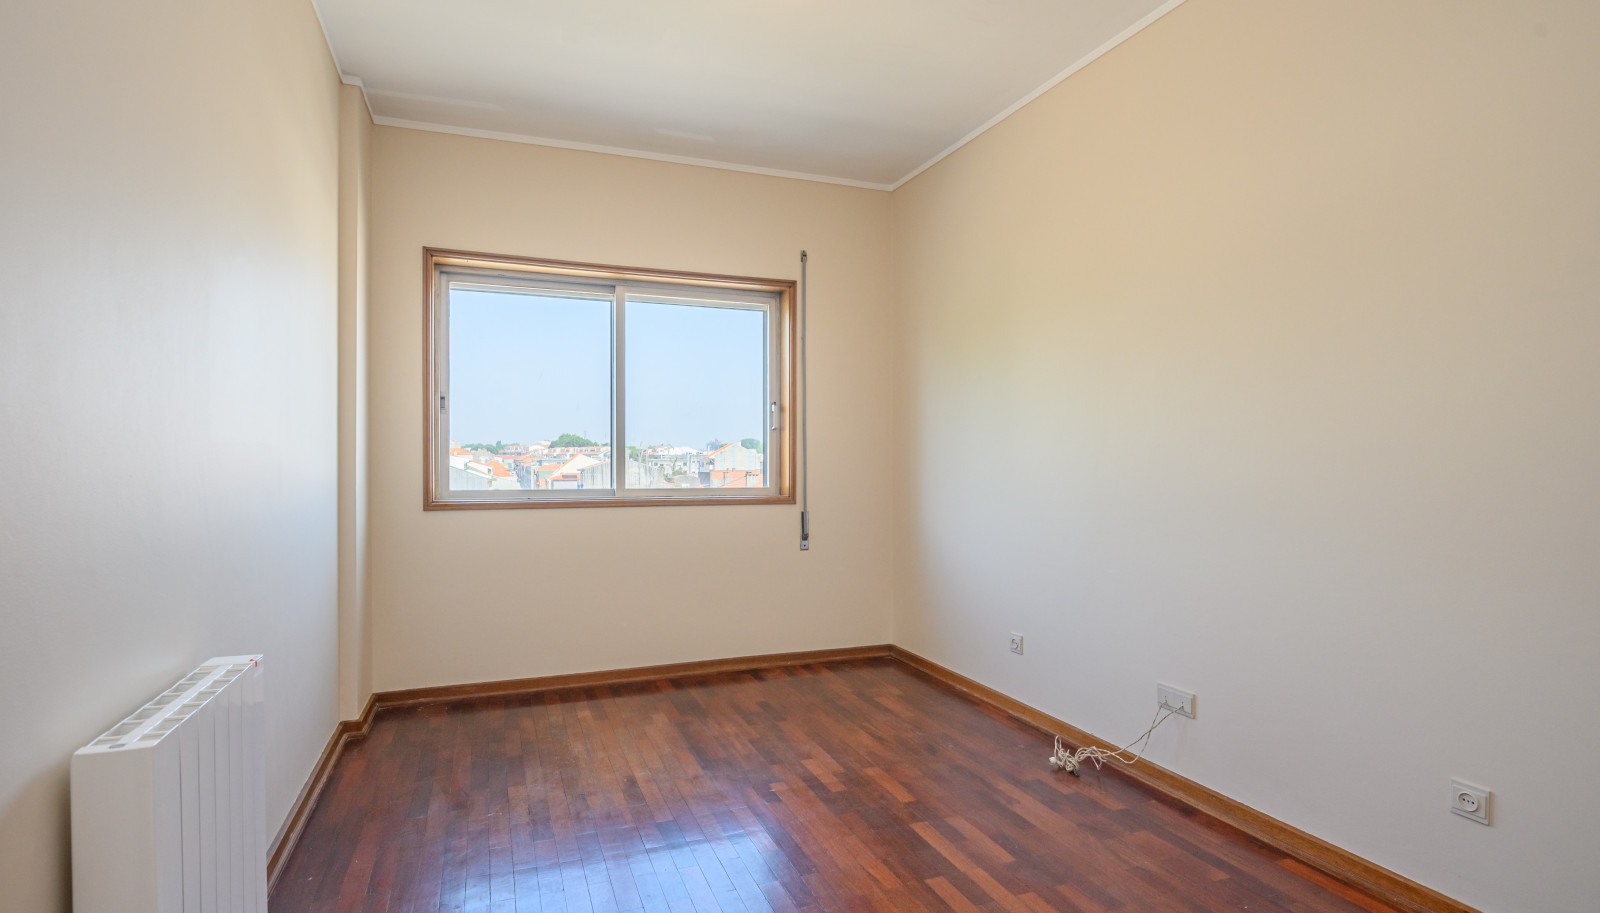 4 bedroom apartment with balcony, for sale, in Porto, Portugal_228364